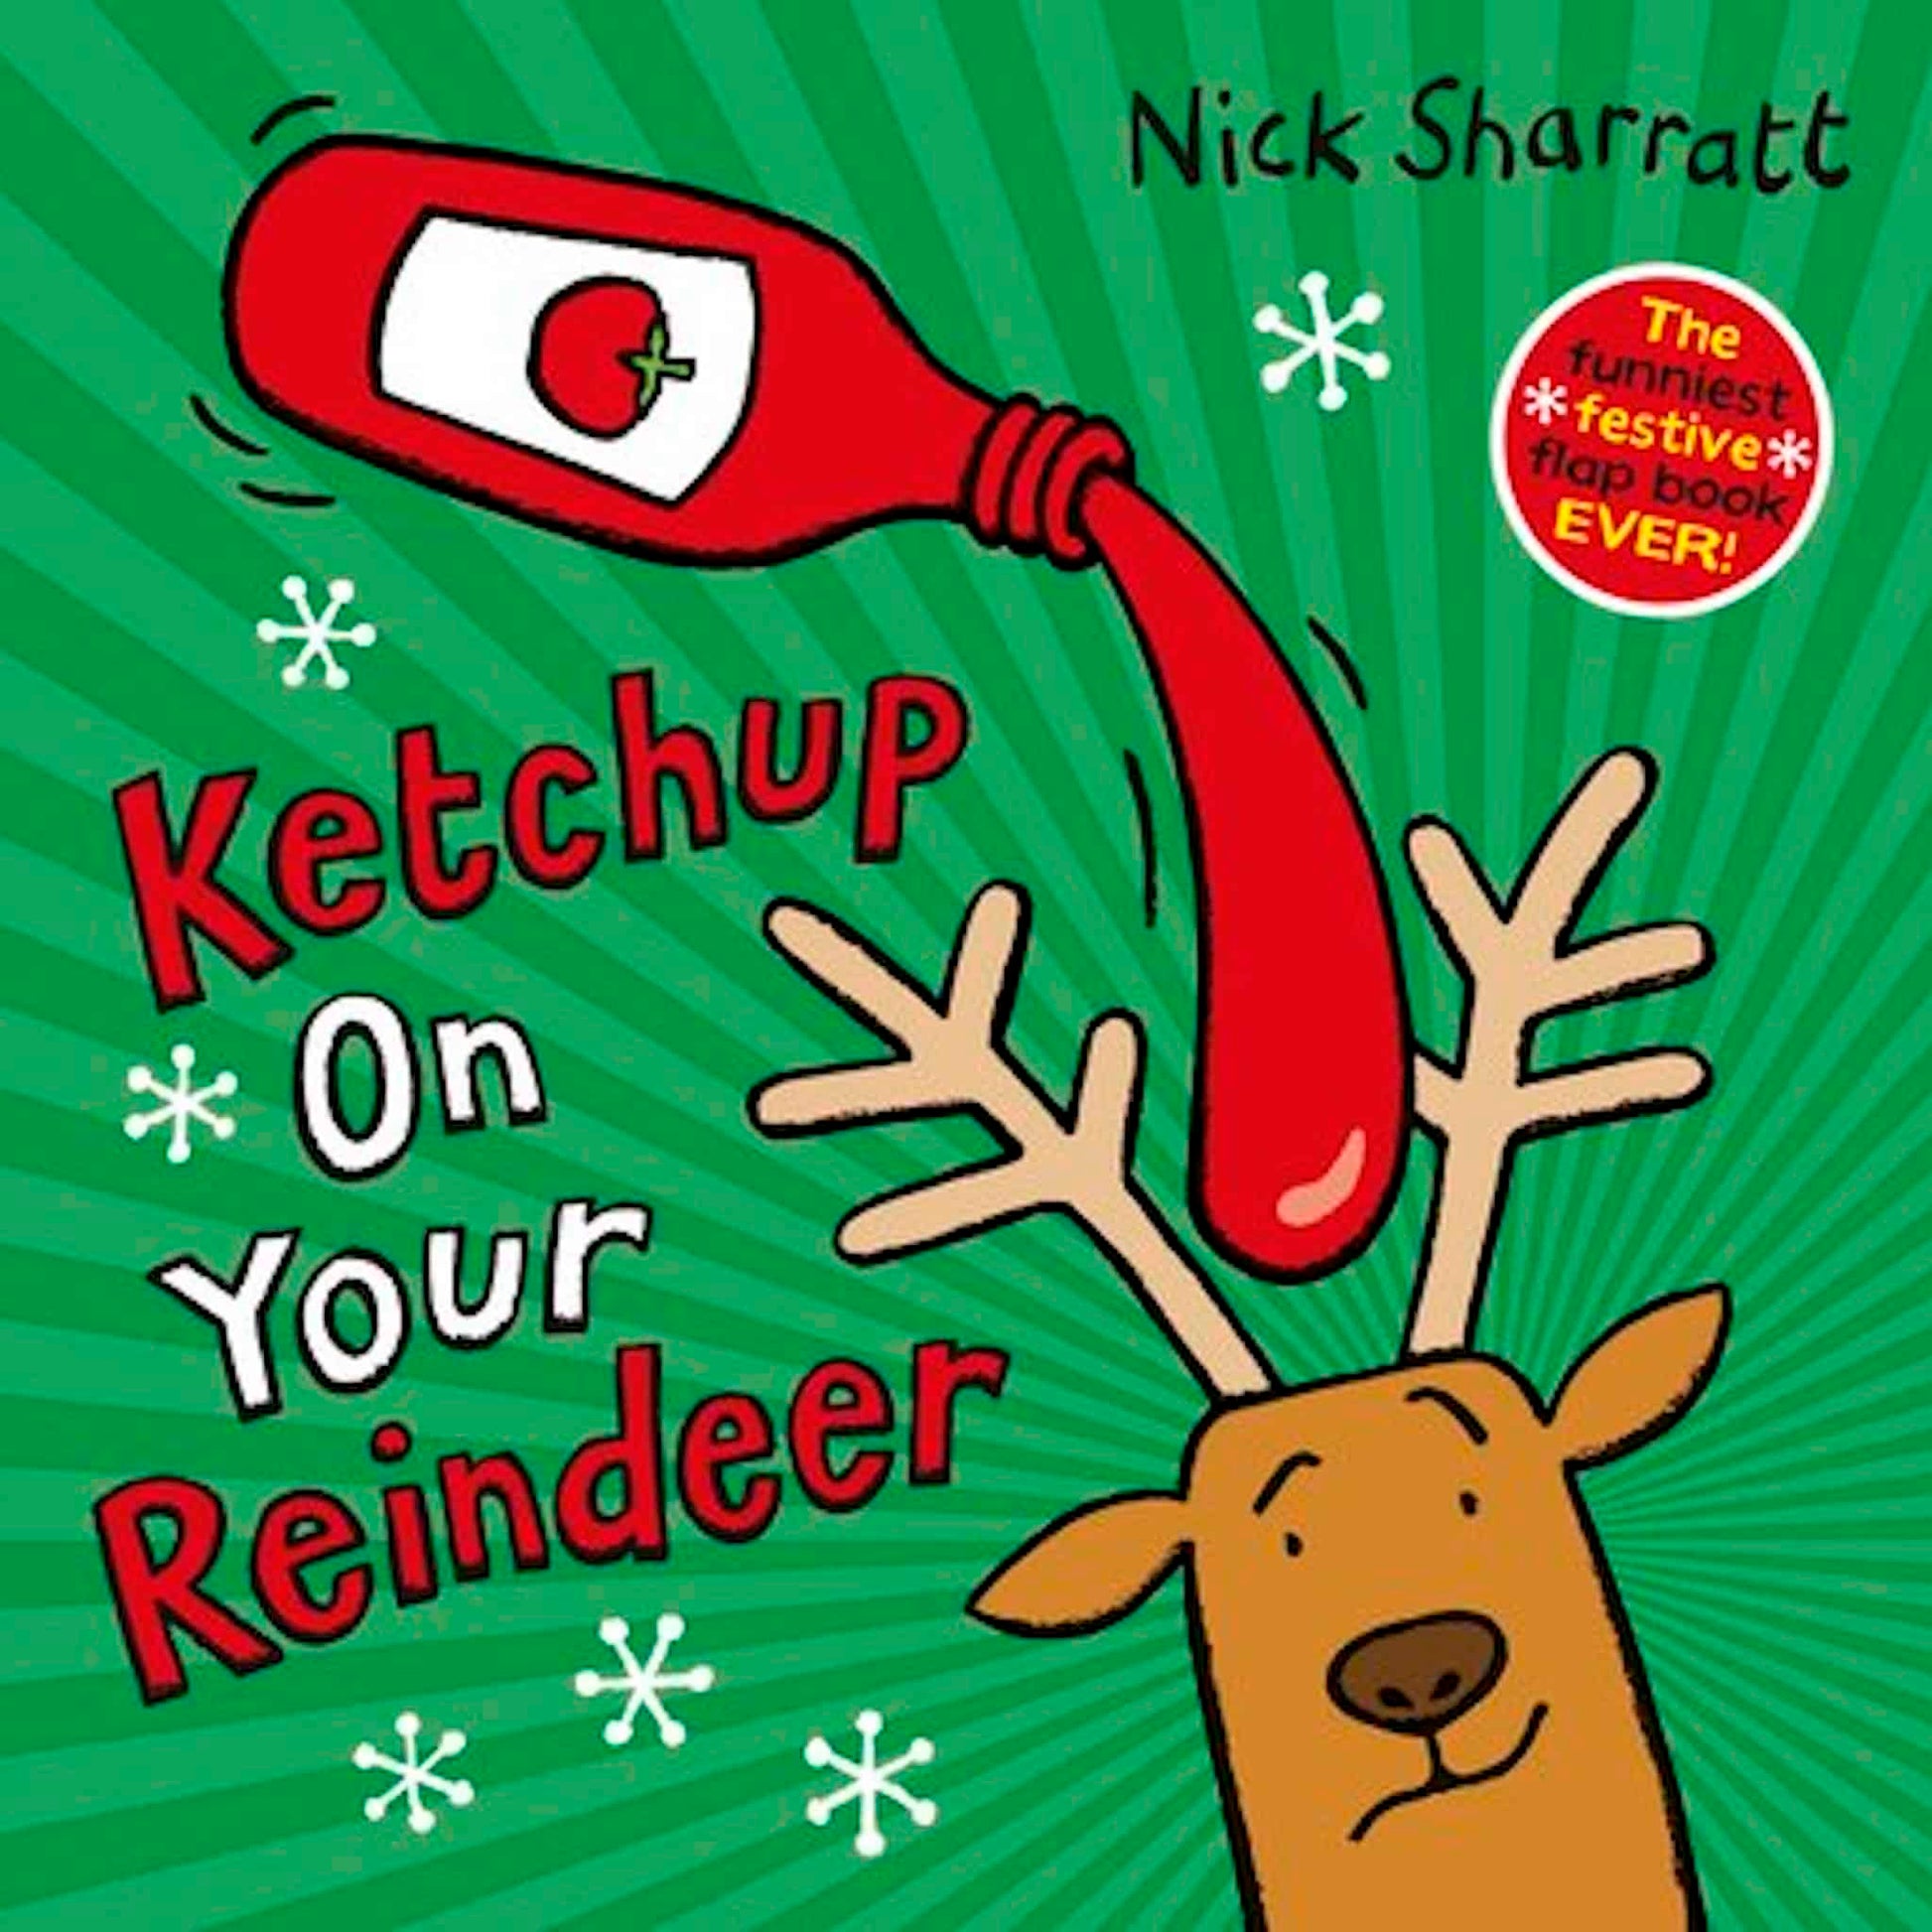 Scholastic Ketchup on Your Reindeer